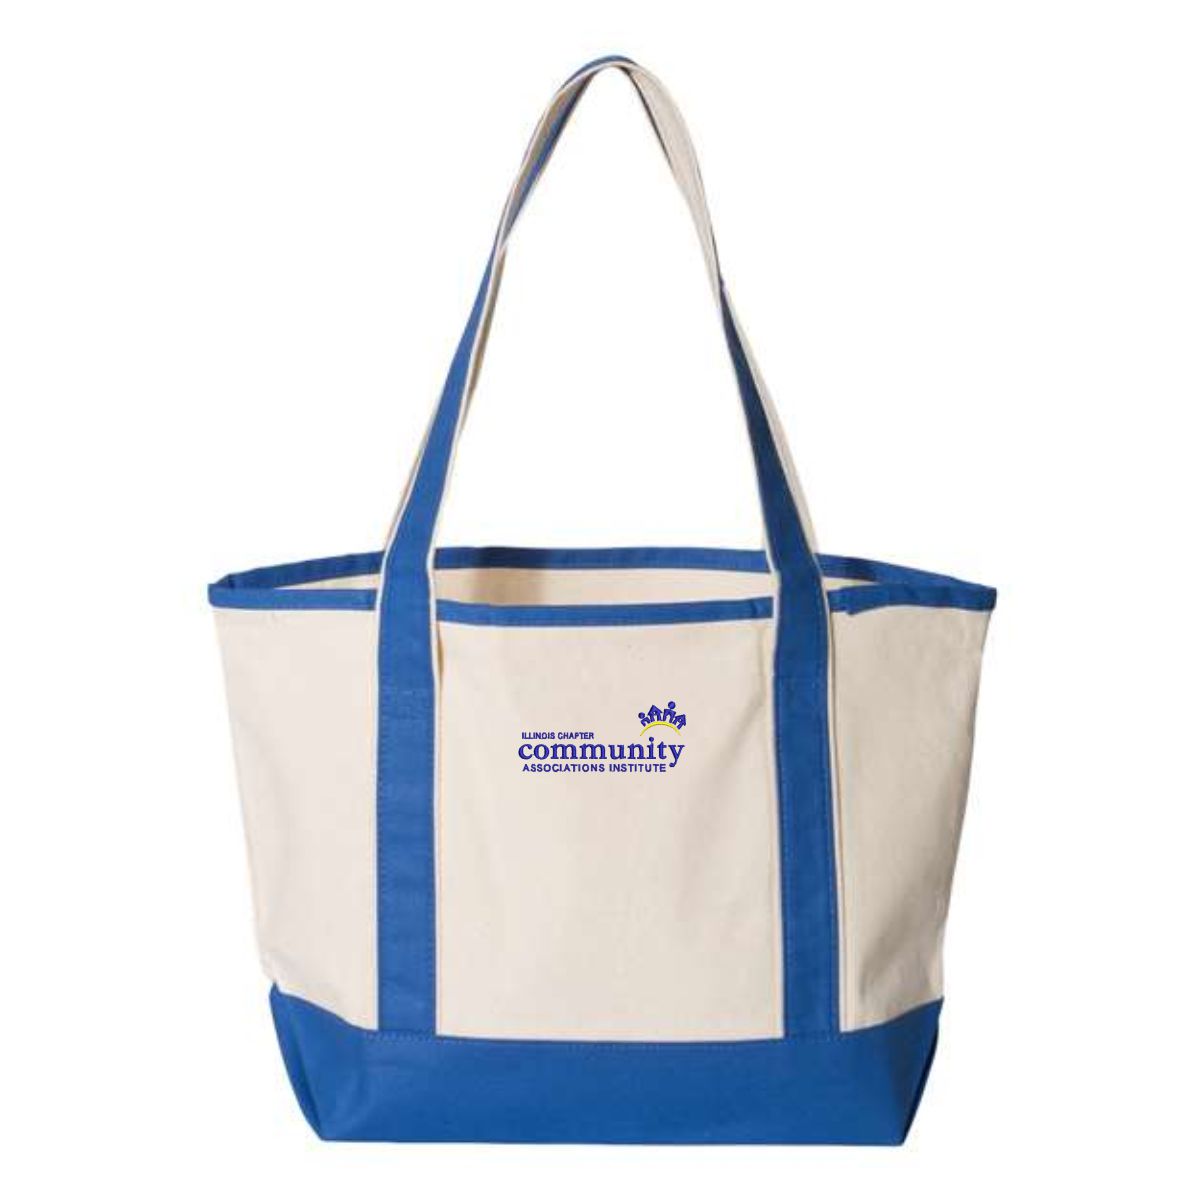 CAI 03 Deluxe Tote | HyperStitch, Inc